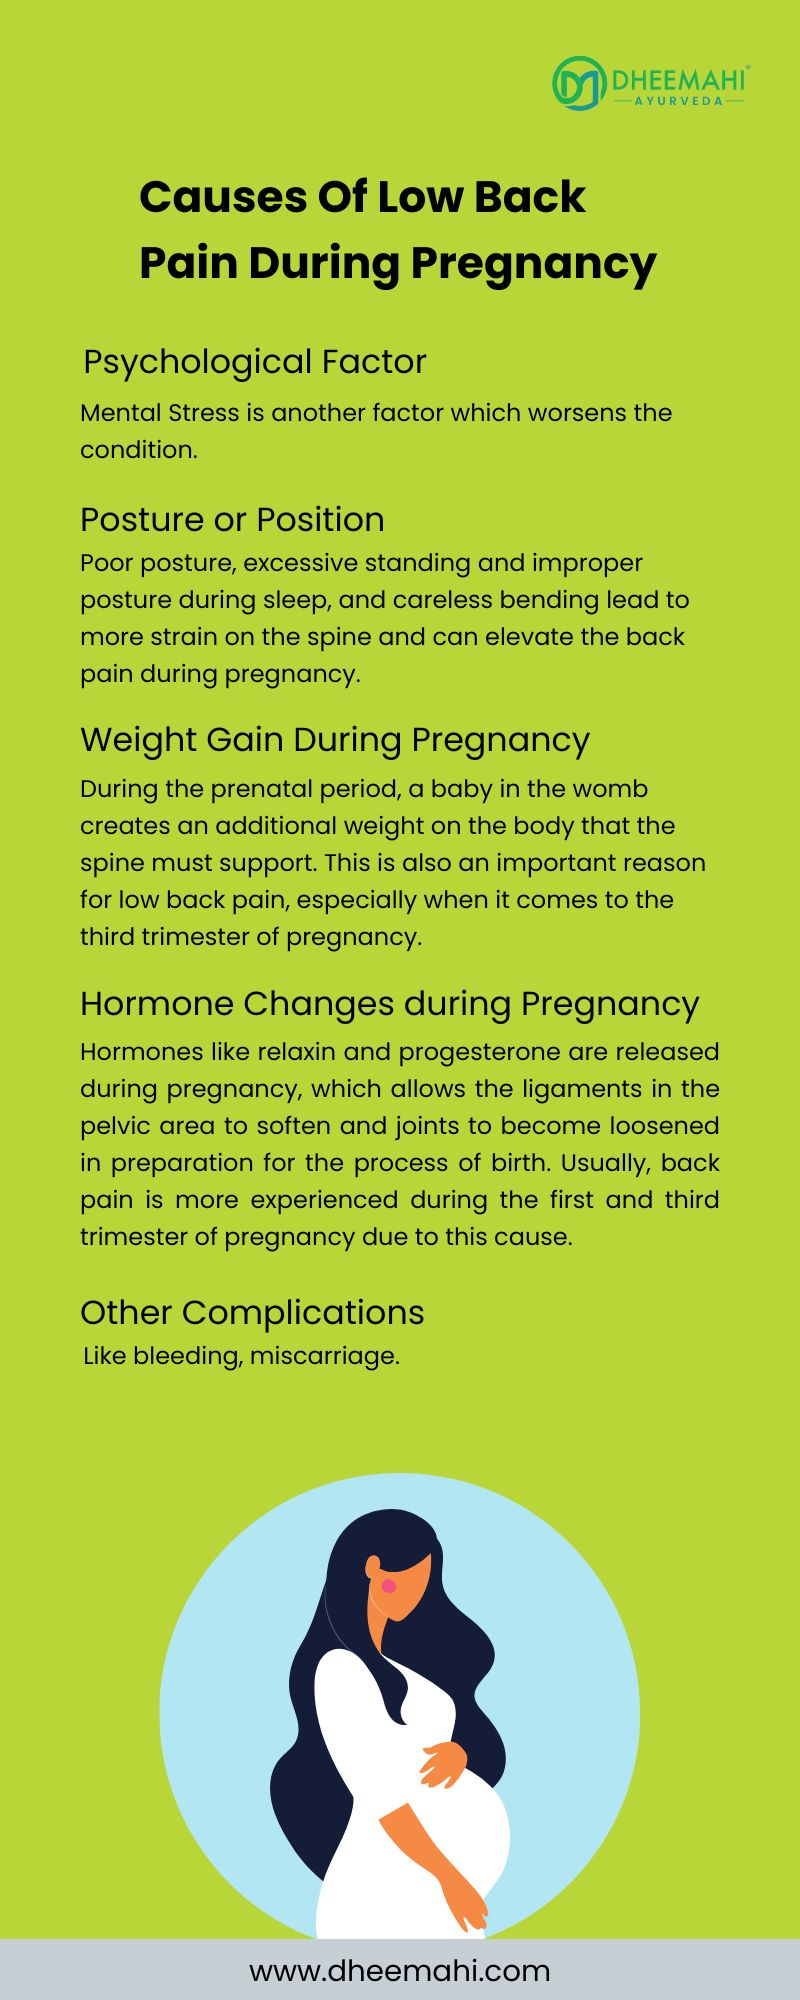 Ayurvedic View on Low Back Pain During Pregnancy